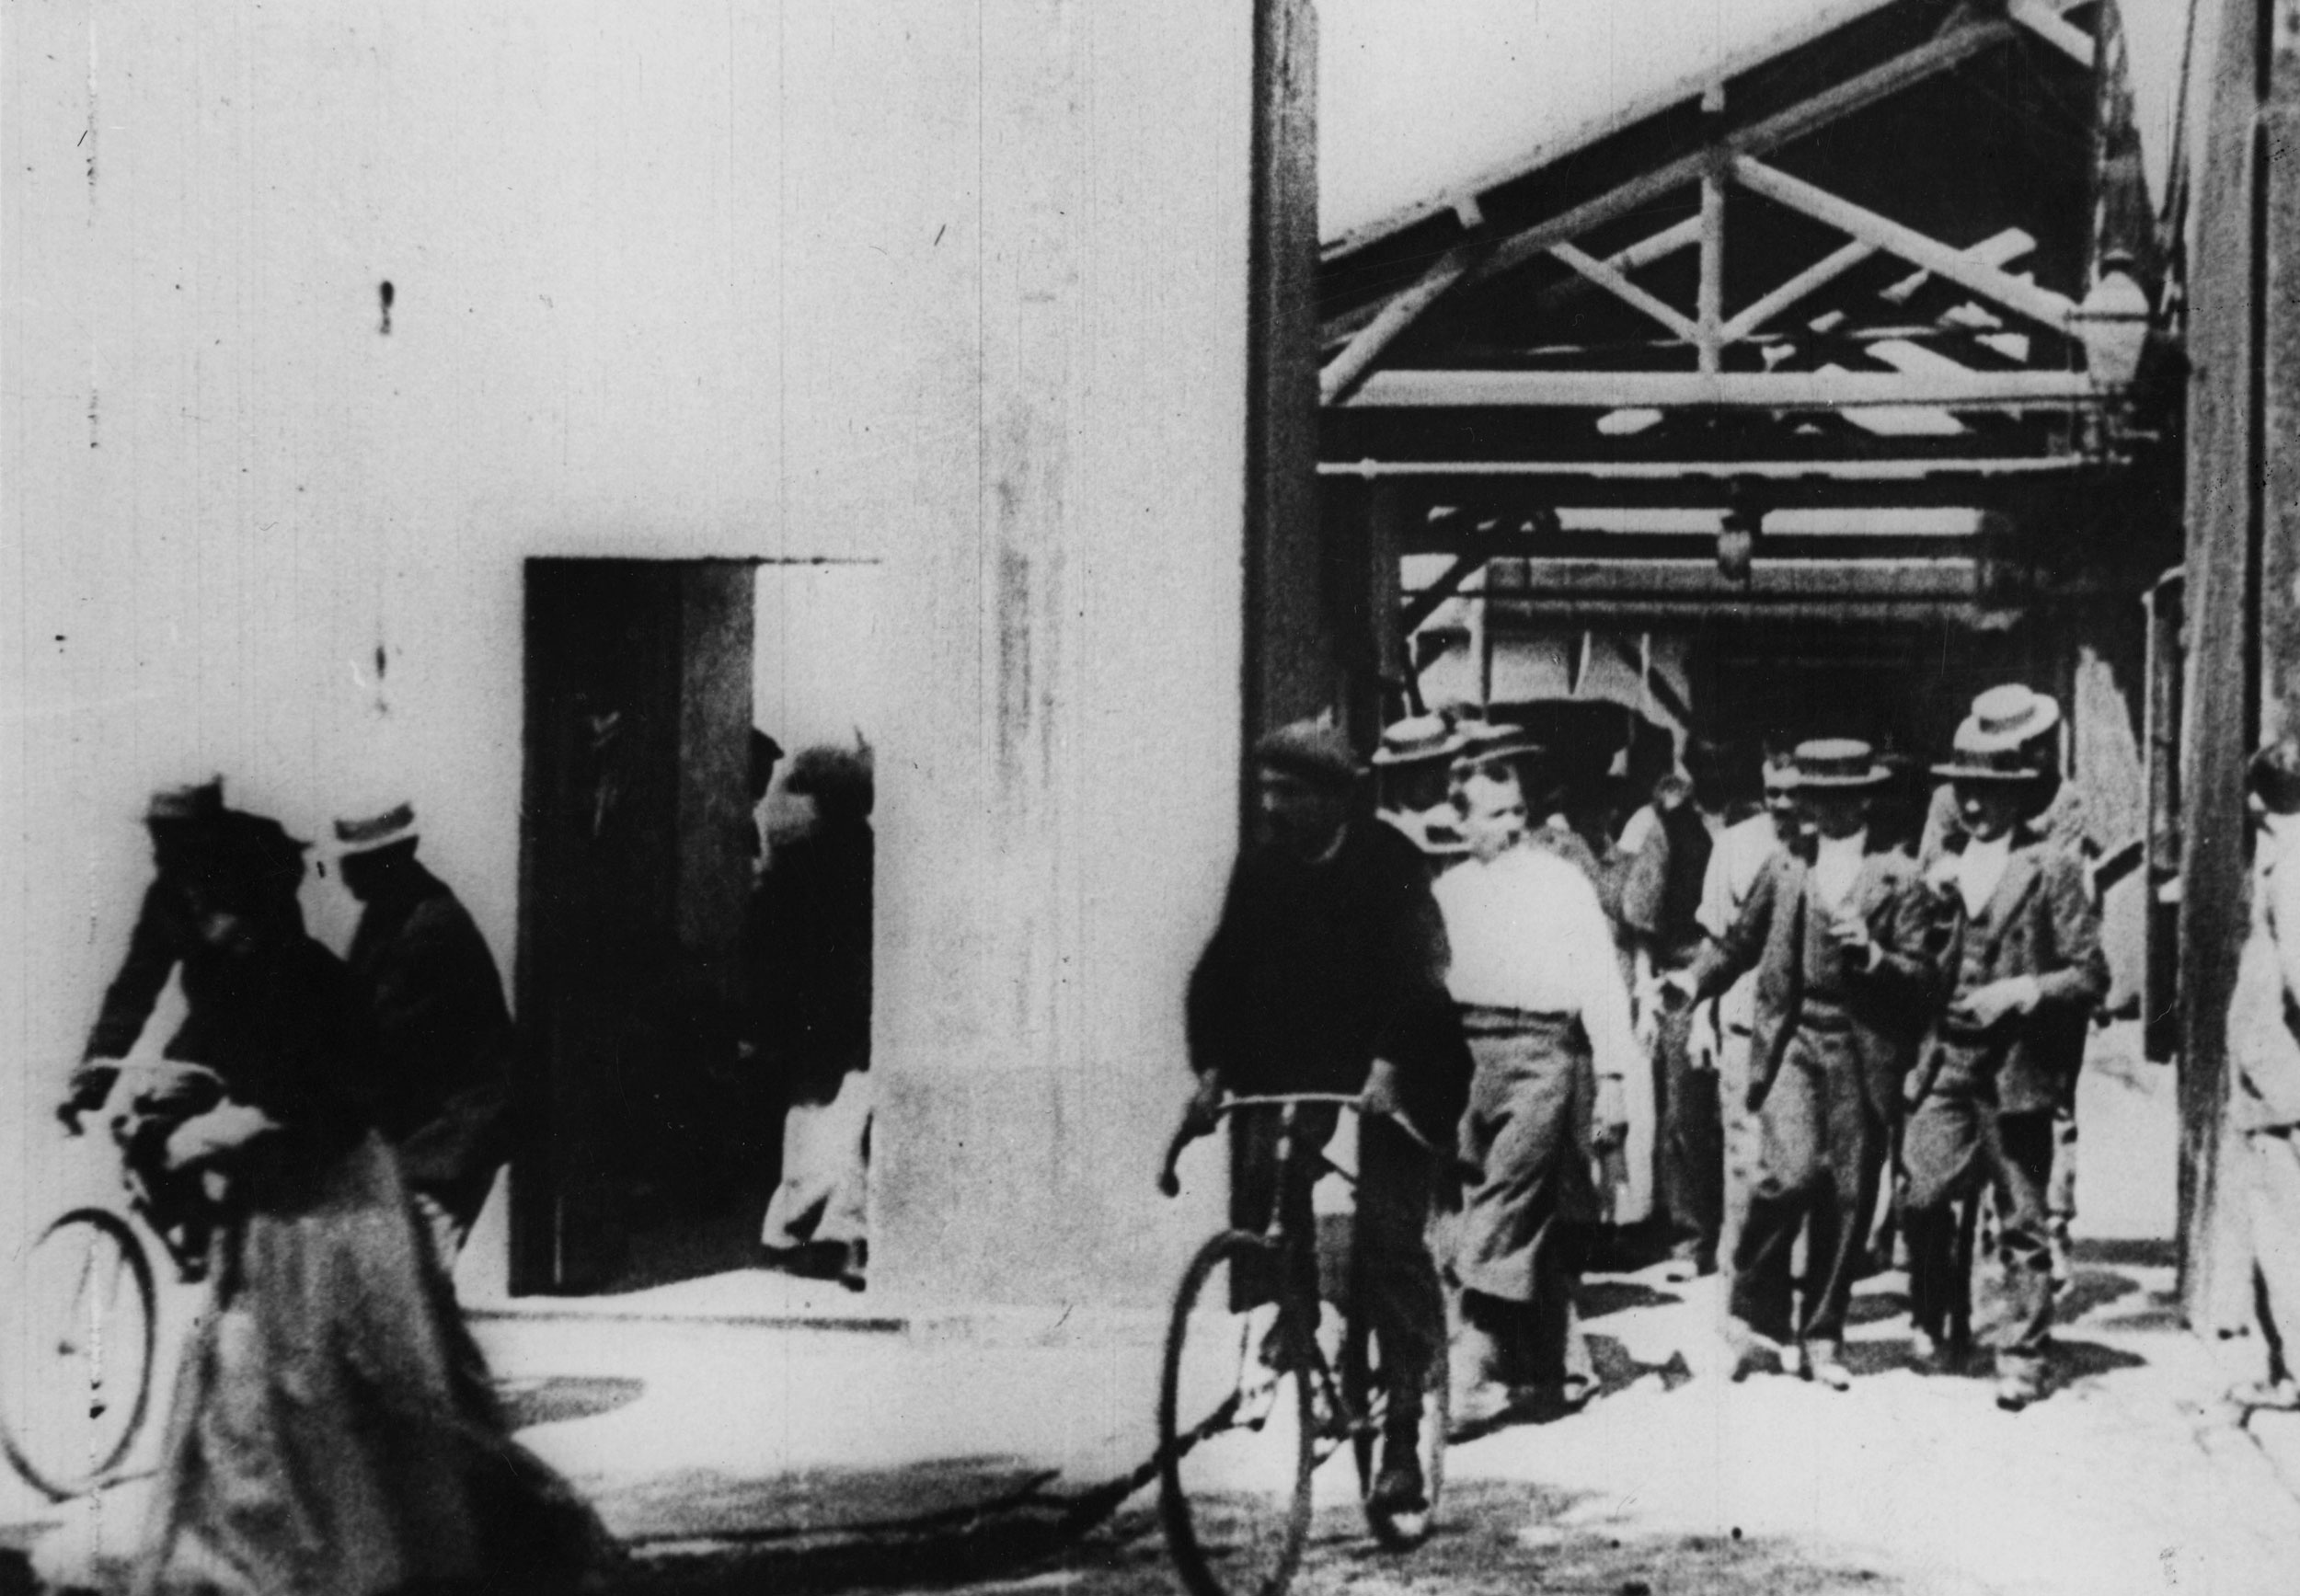 Lumiere Brothers, Workers leaving Lumiere's Factory, Art and aesthetics, 2500x1740 HD Desktop